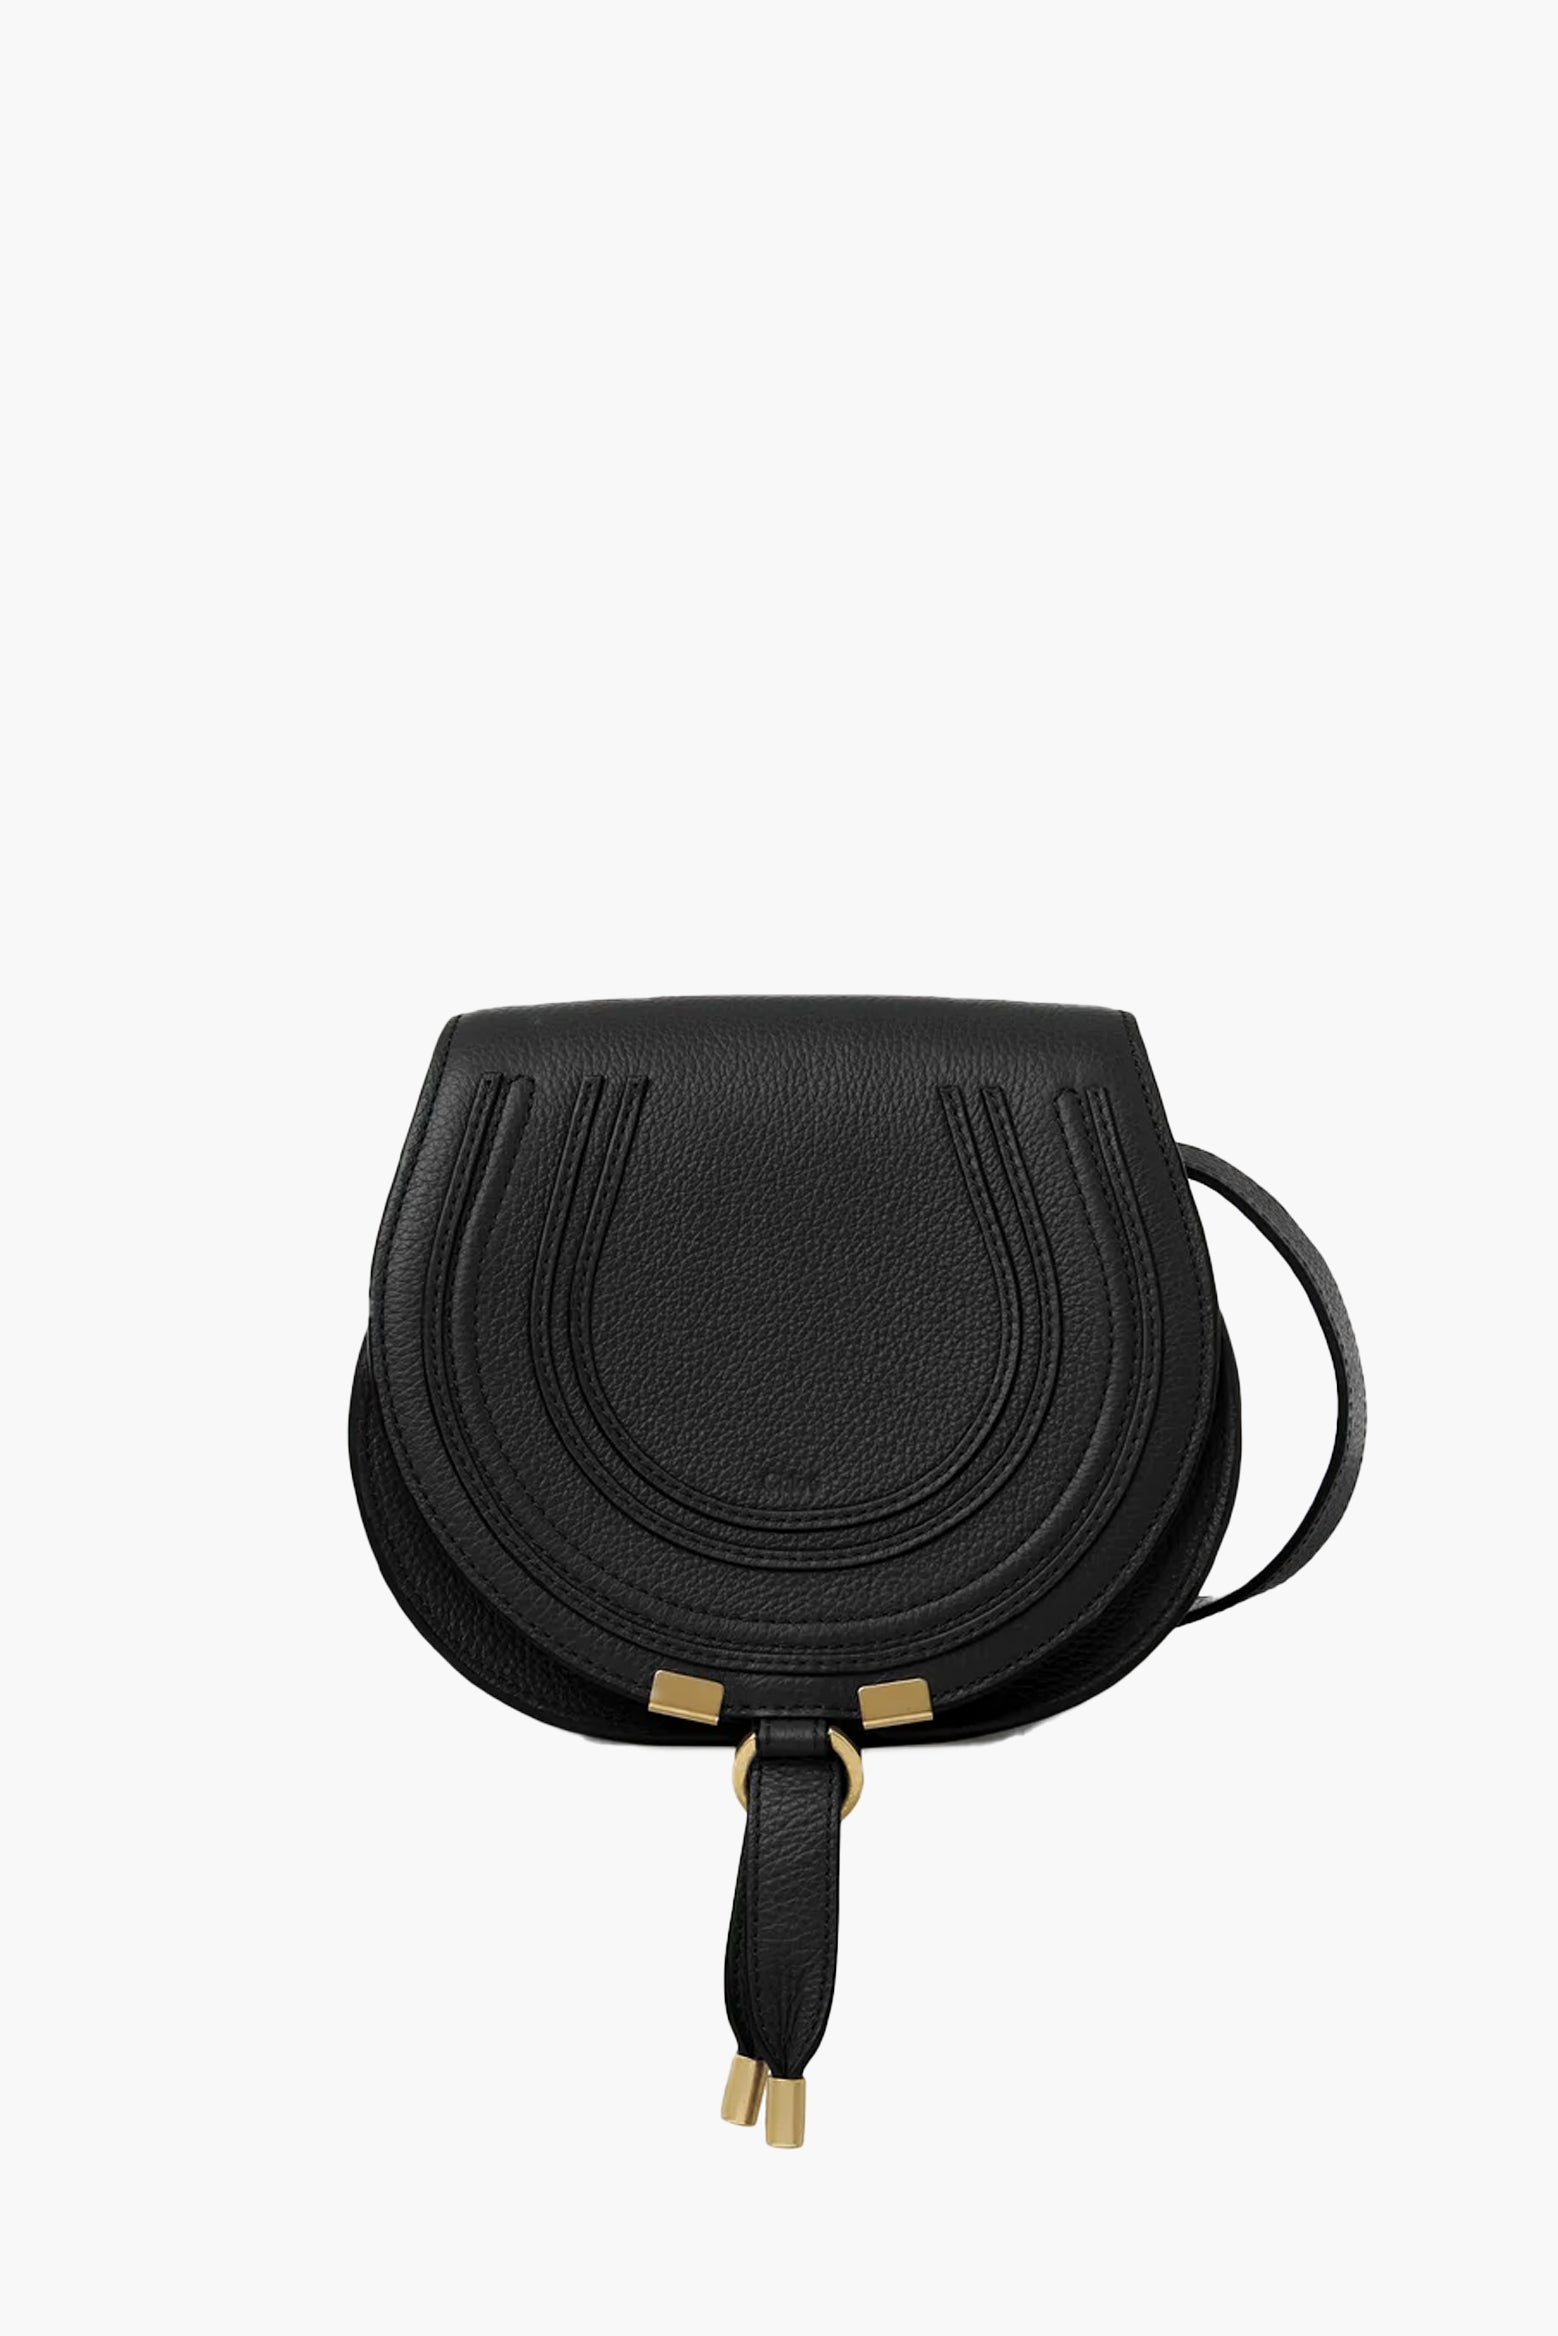 Chloe Marcie Small Saddle Crossbody Bag in Black available at The New Trend Australia. 